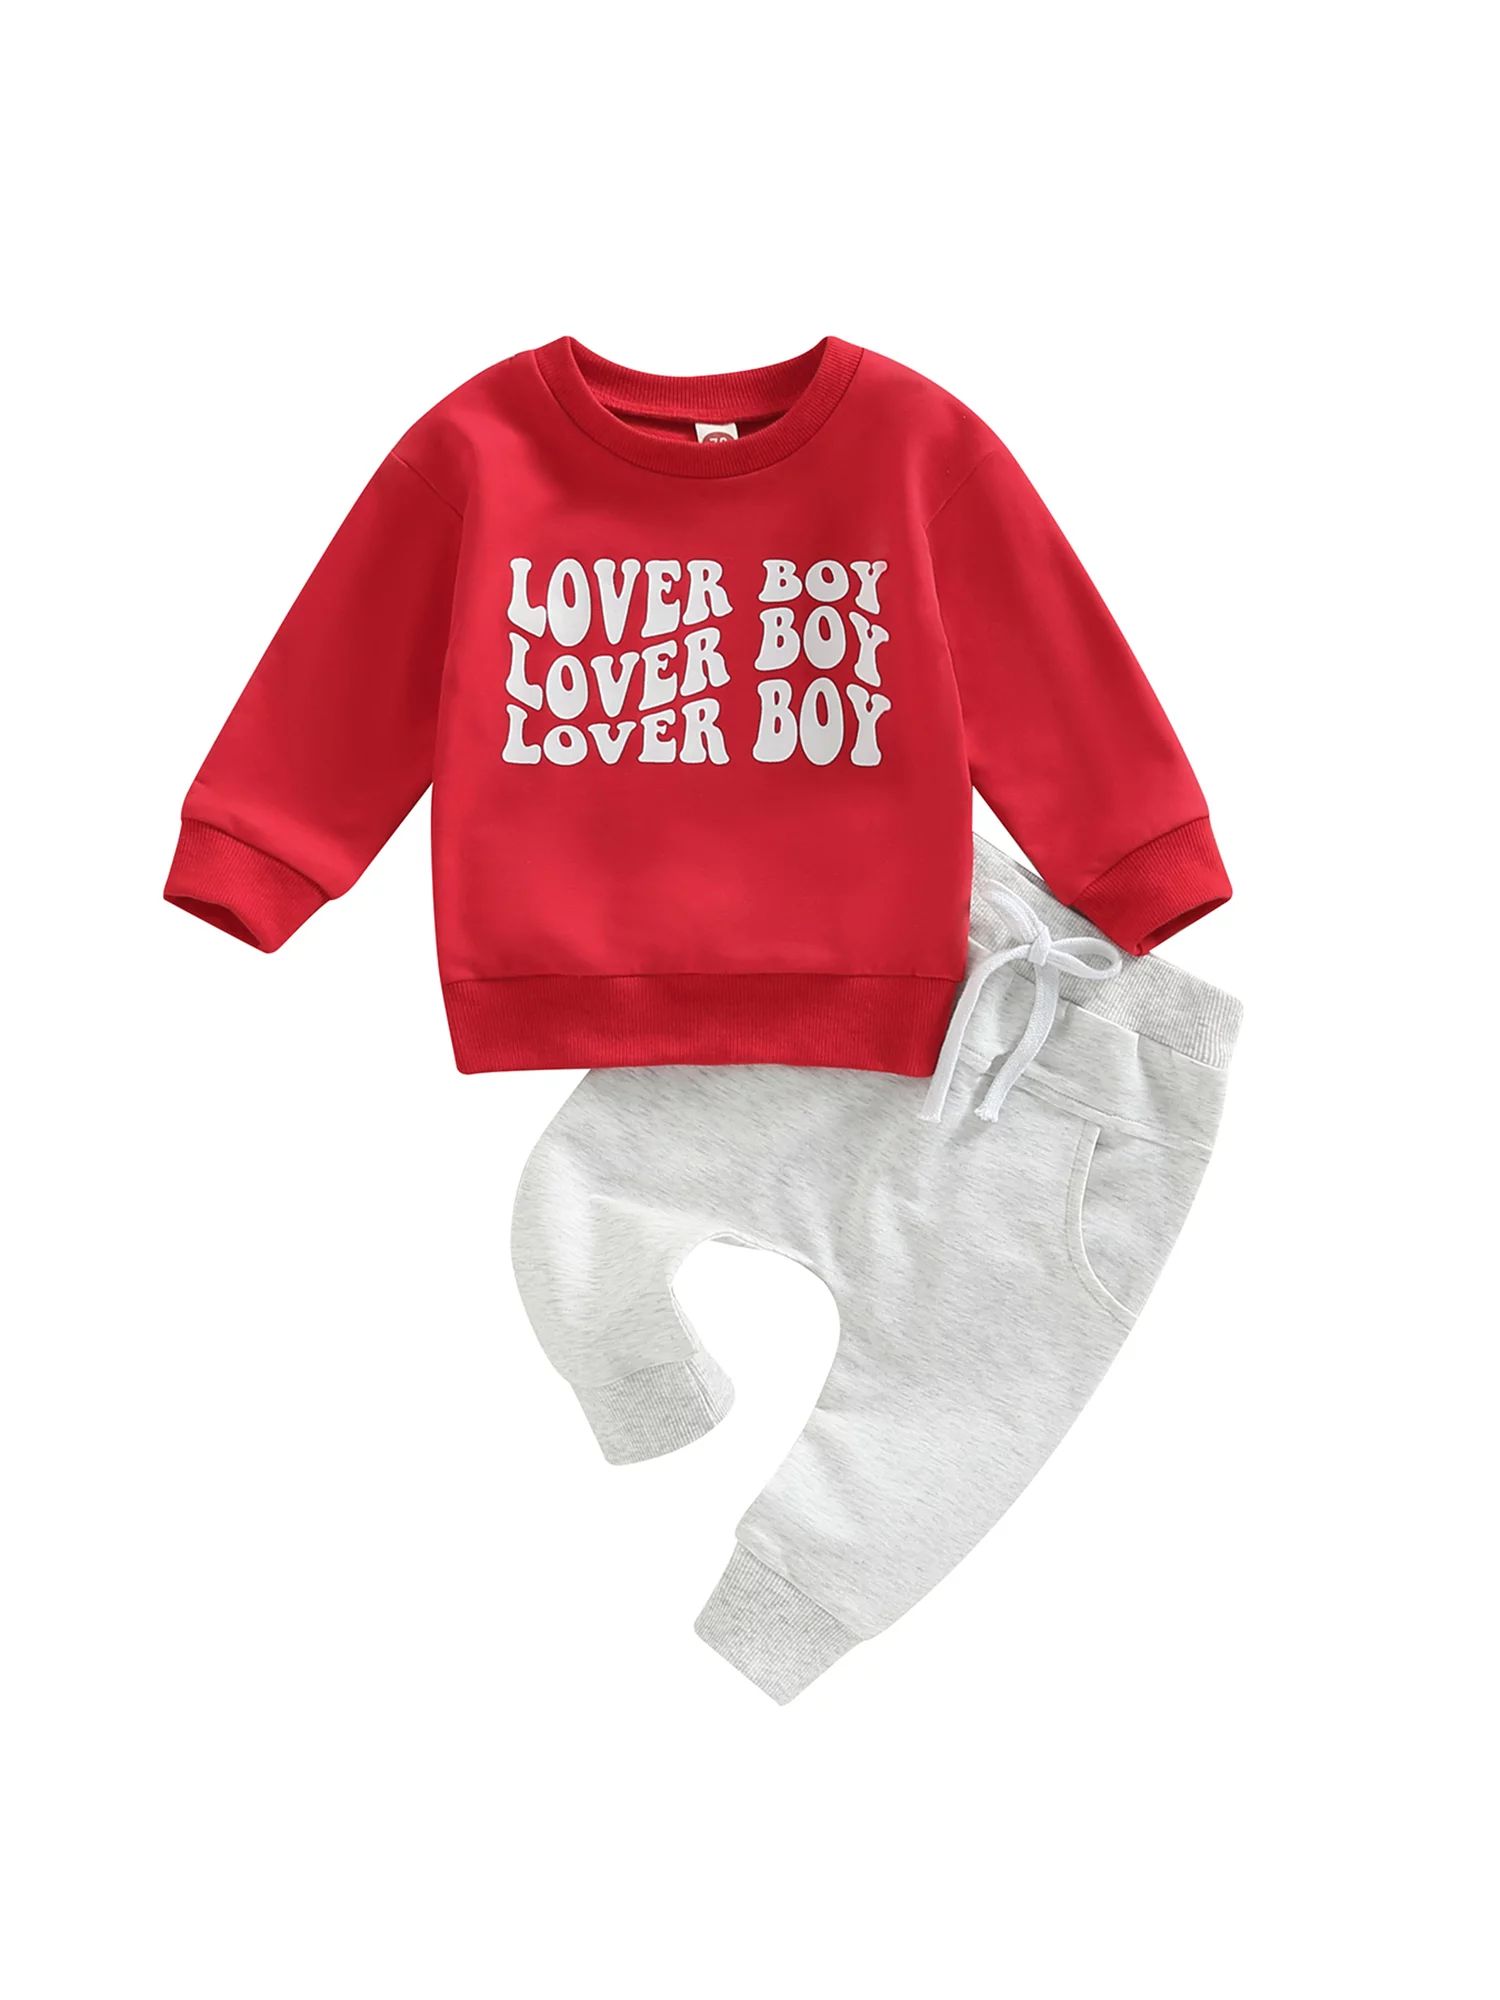 Toddler Baby Lover Boy Valentine's Day Outfits Long Sleeve Shirts Letter Sweatshirt Pants 2Pcs Sp... | Walmart (US)